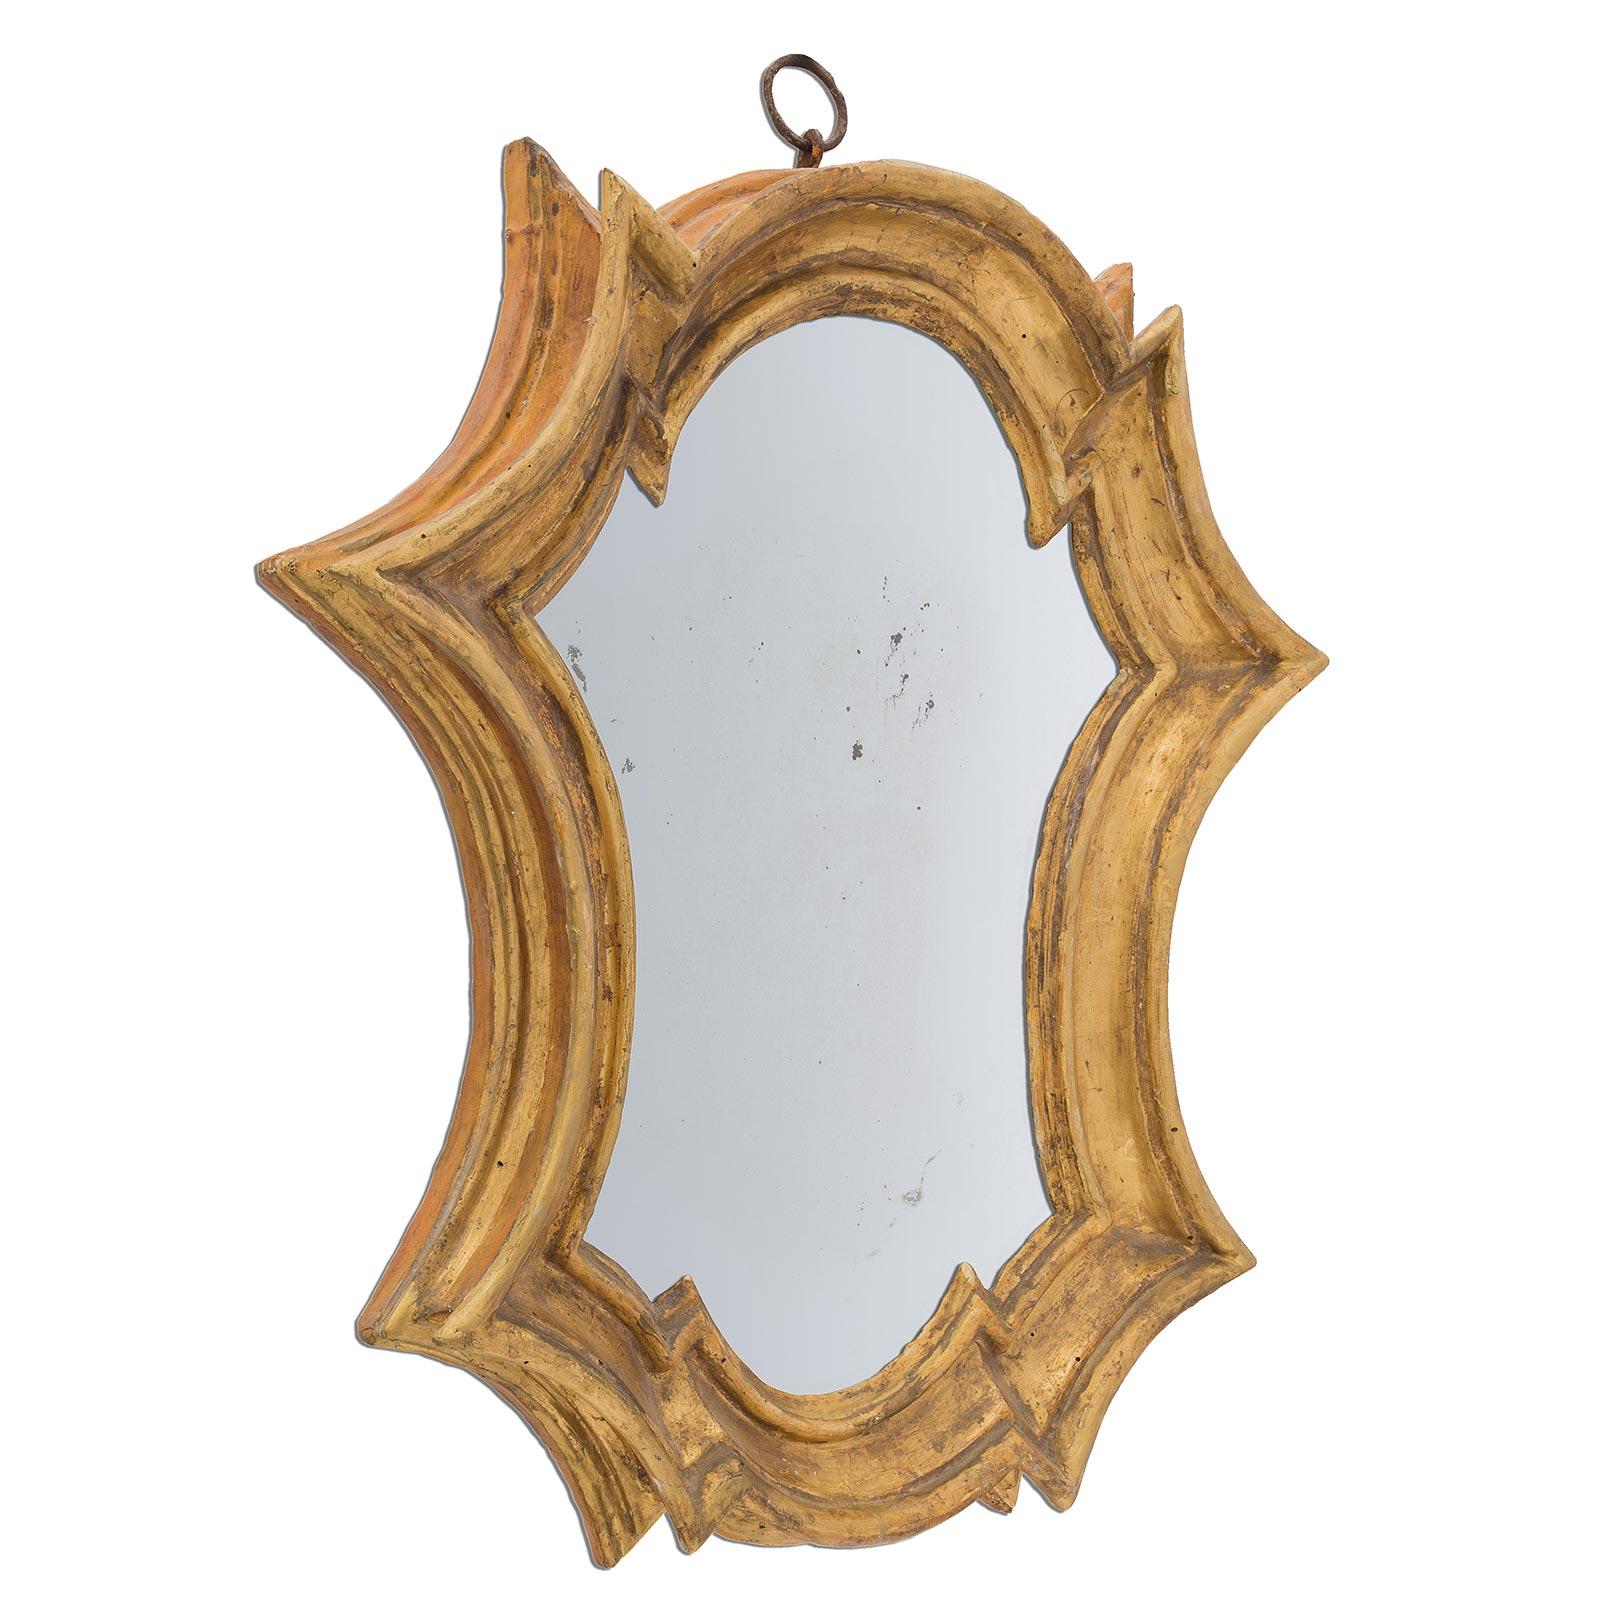 A very attractive and most decorative pair of early 18th century Italian Baroque period mirrors. The pair with an unusual shape have a thick mottled design with all original Mecca finish. At the top remains the original period iron loop.

 